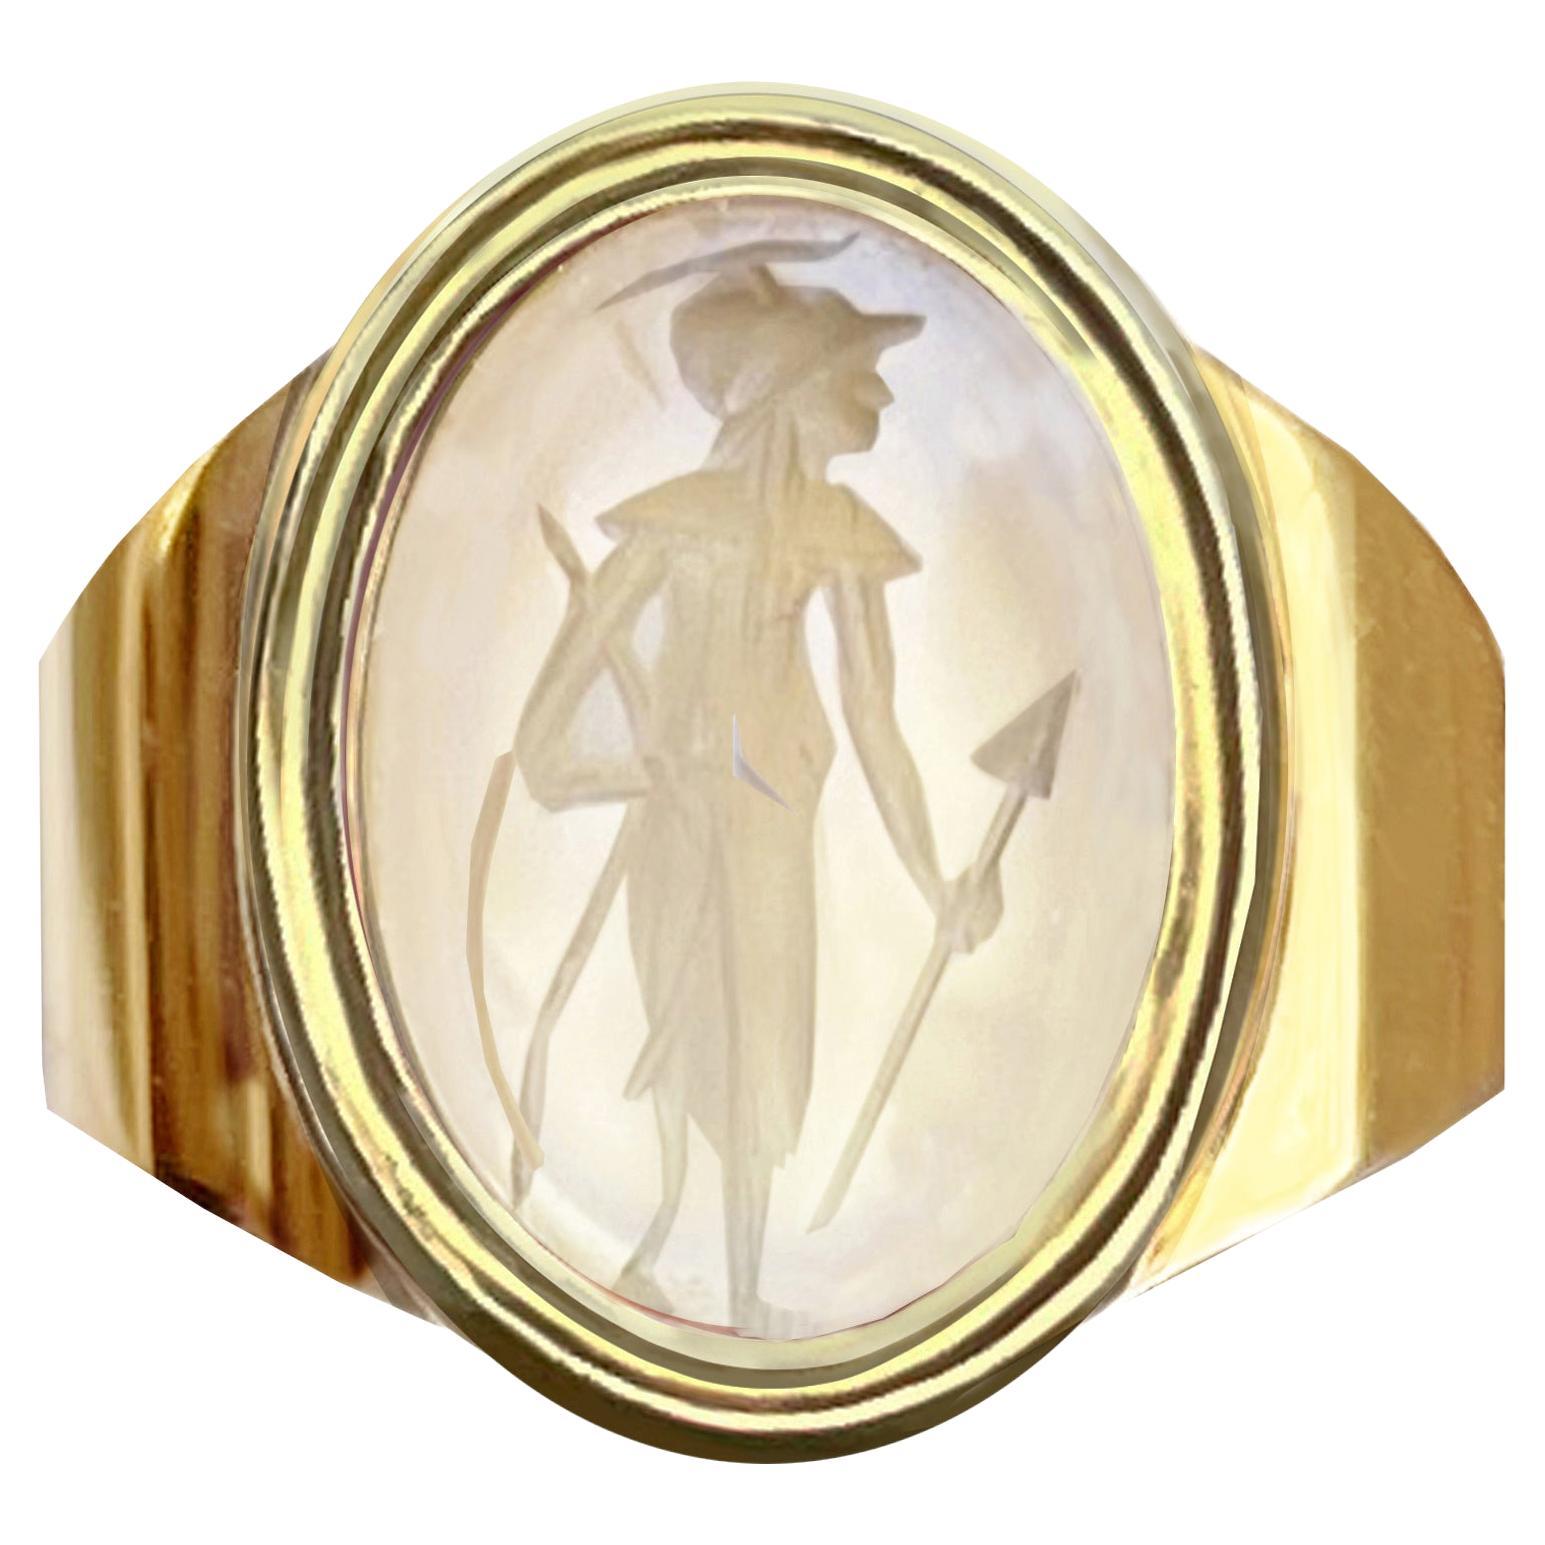 Roman Agate Intaglio '2nd Cent, AD' Depicting the Goddess Athena 18 Kt Gold Ring